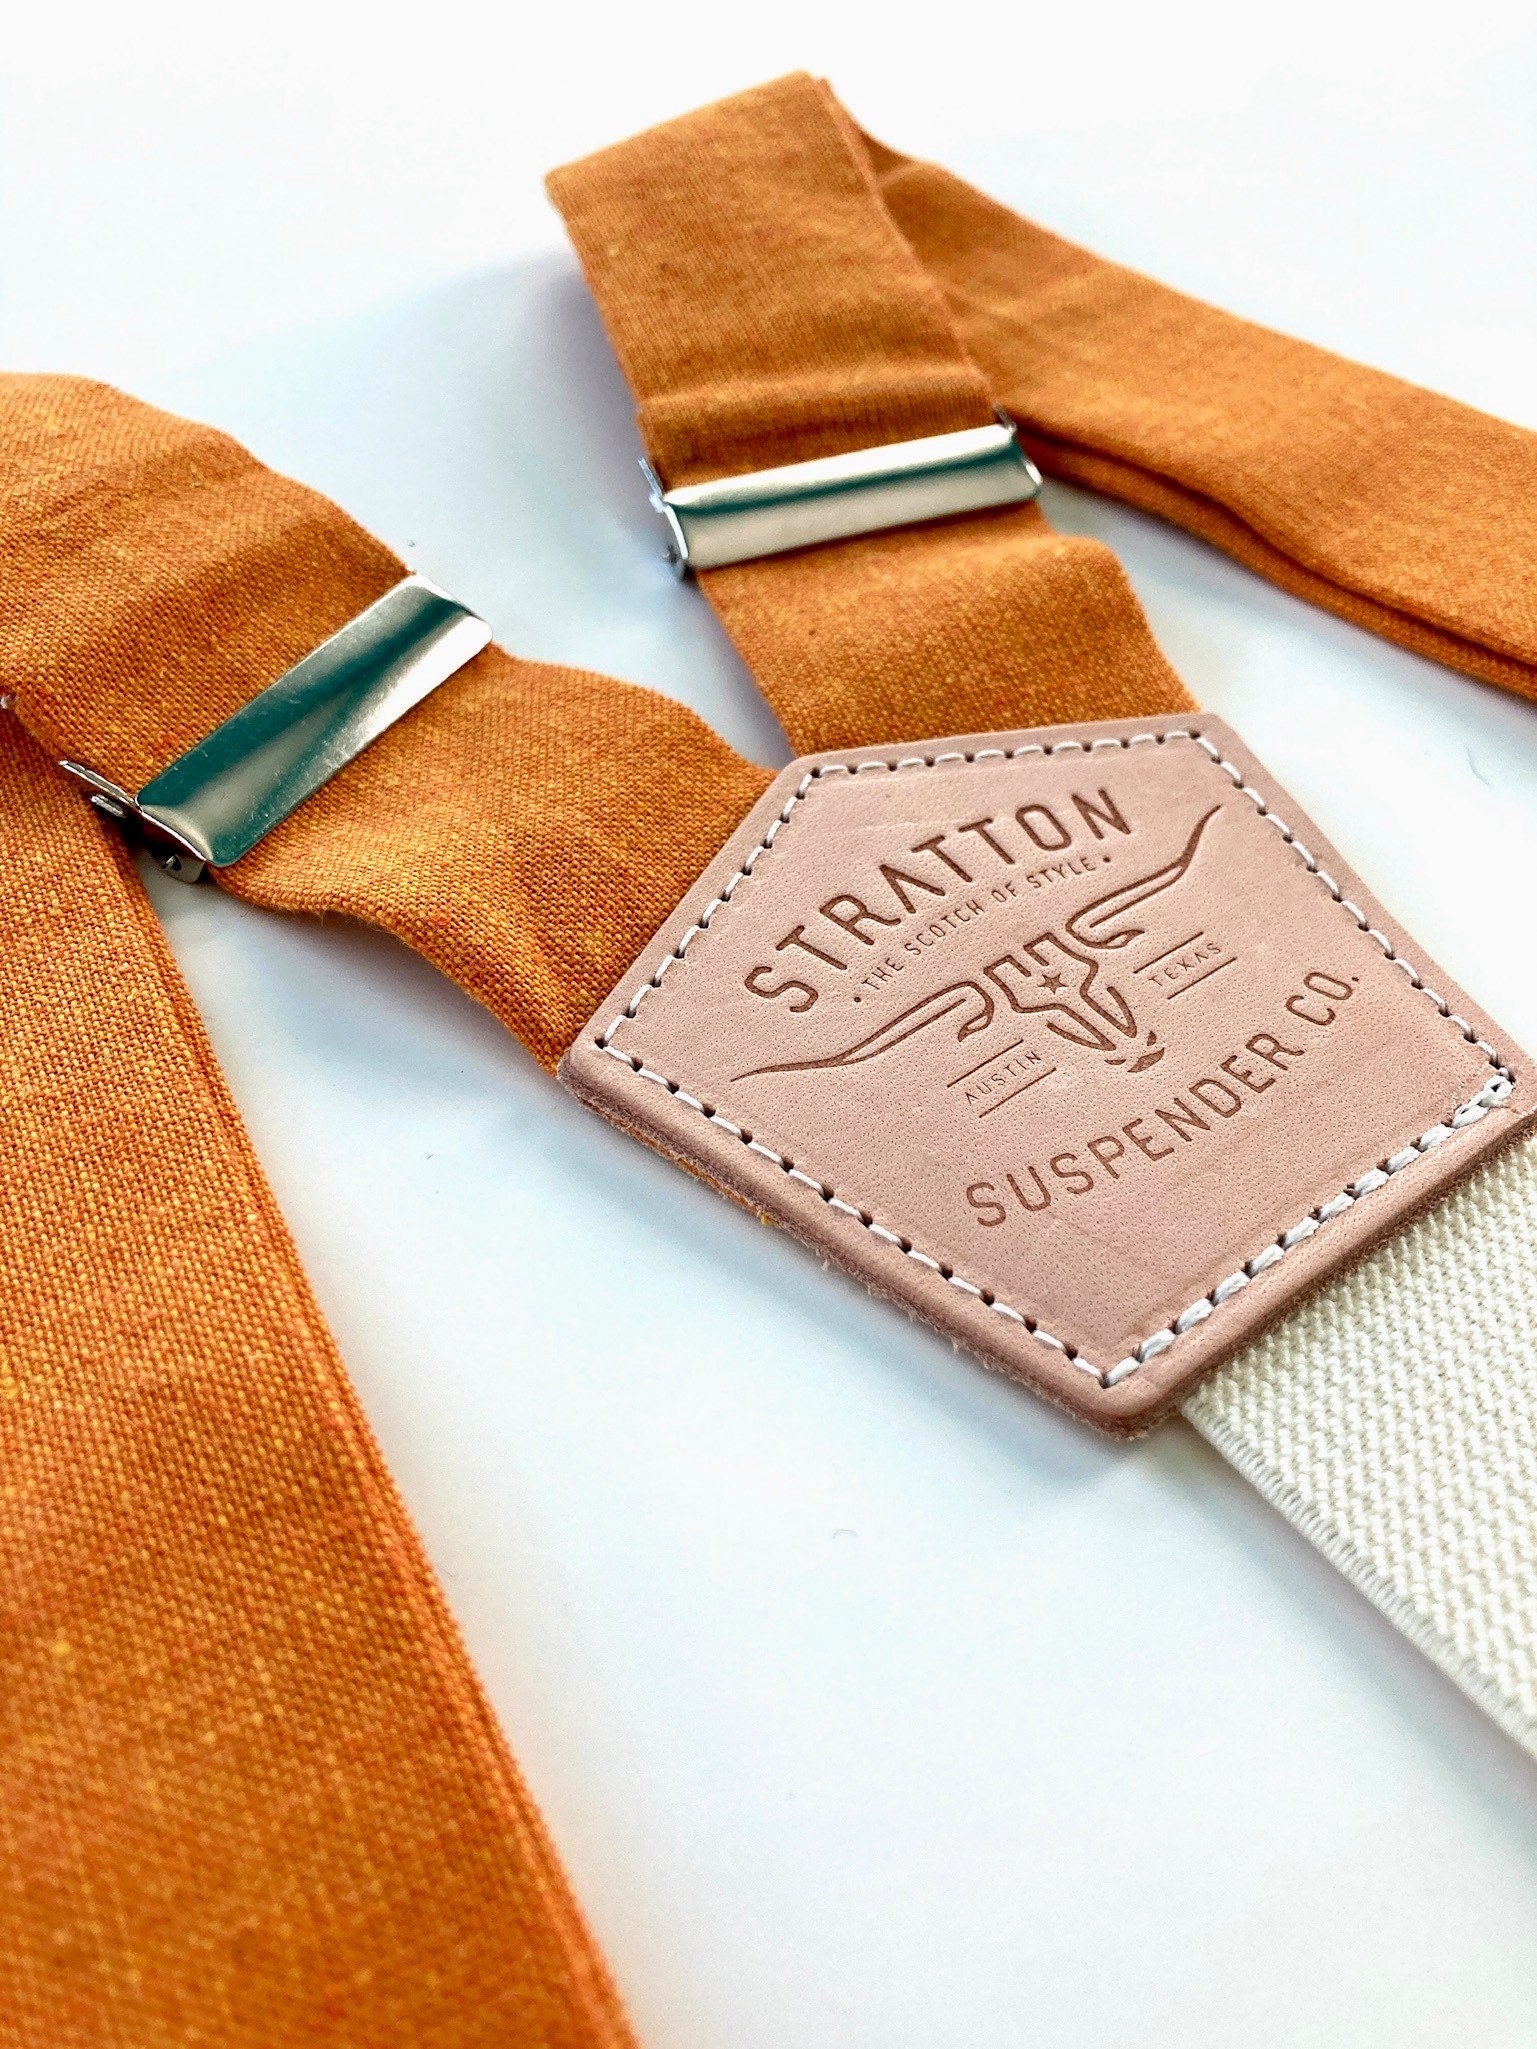 Stratton Suspender Co. features the orange linen suspenders on veg tan shoulder leather with cream colored elastic back strap for the Fall 2022 suspenders collection 